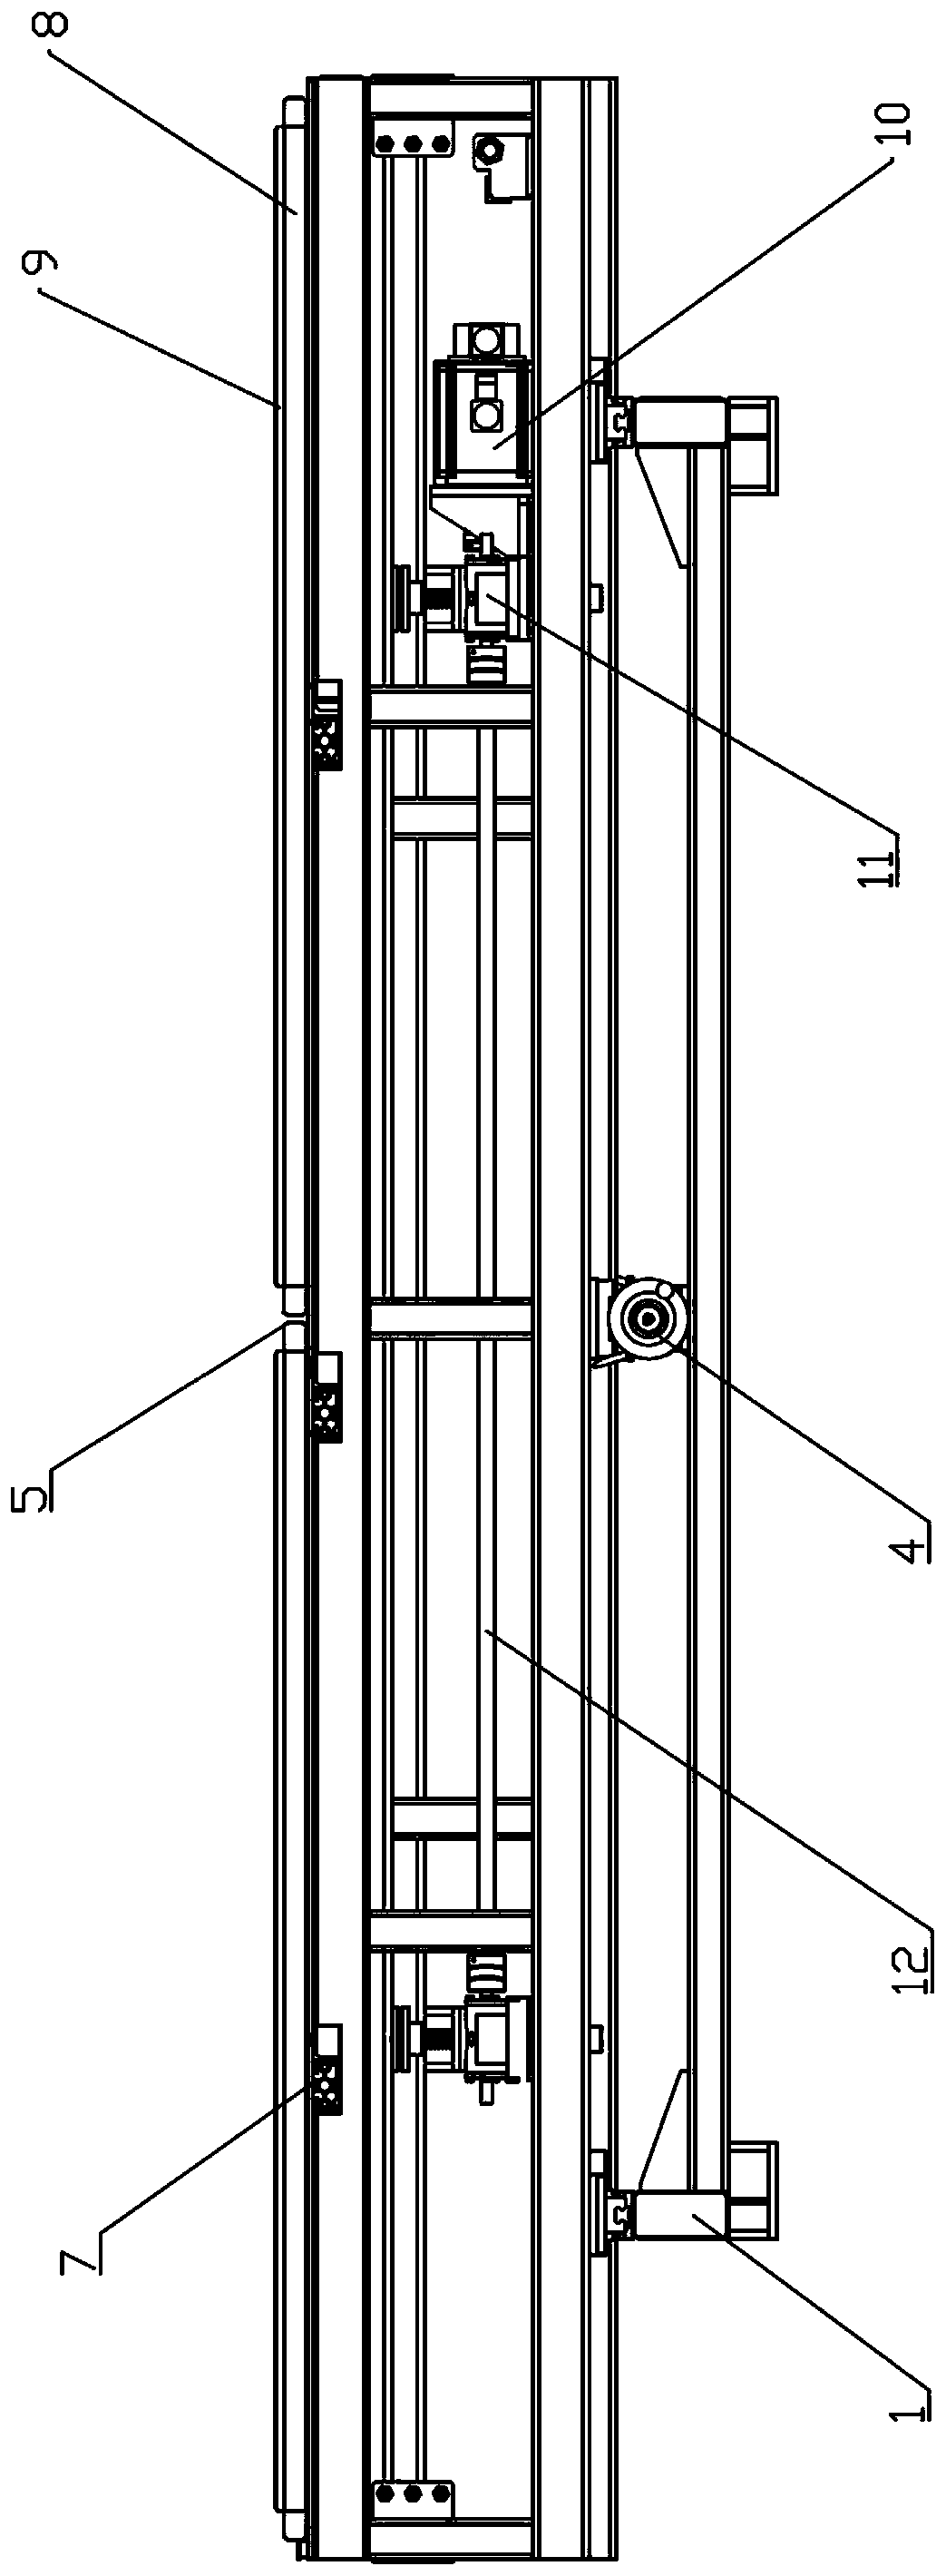 Mechanism for adjusting position of fabricated wall frame